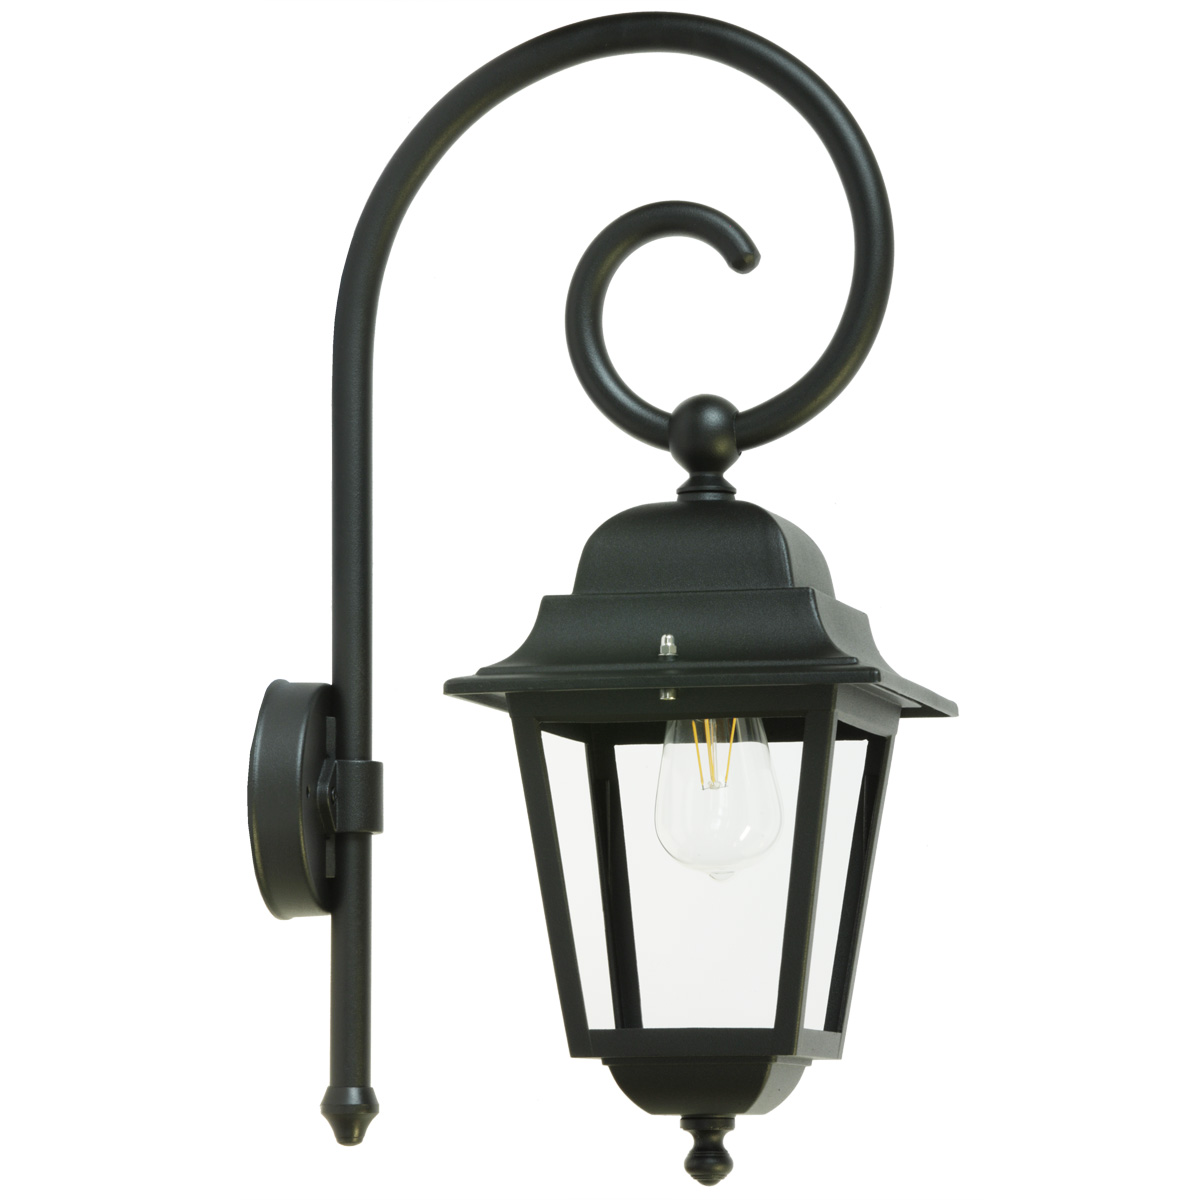 Small Wall Light for Outdoors with Crosier Arm